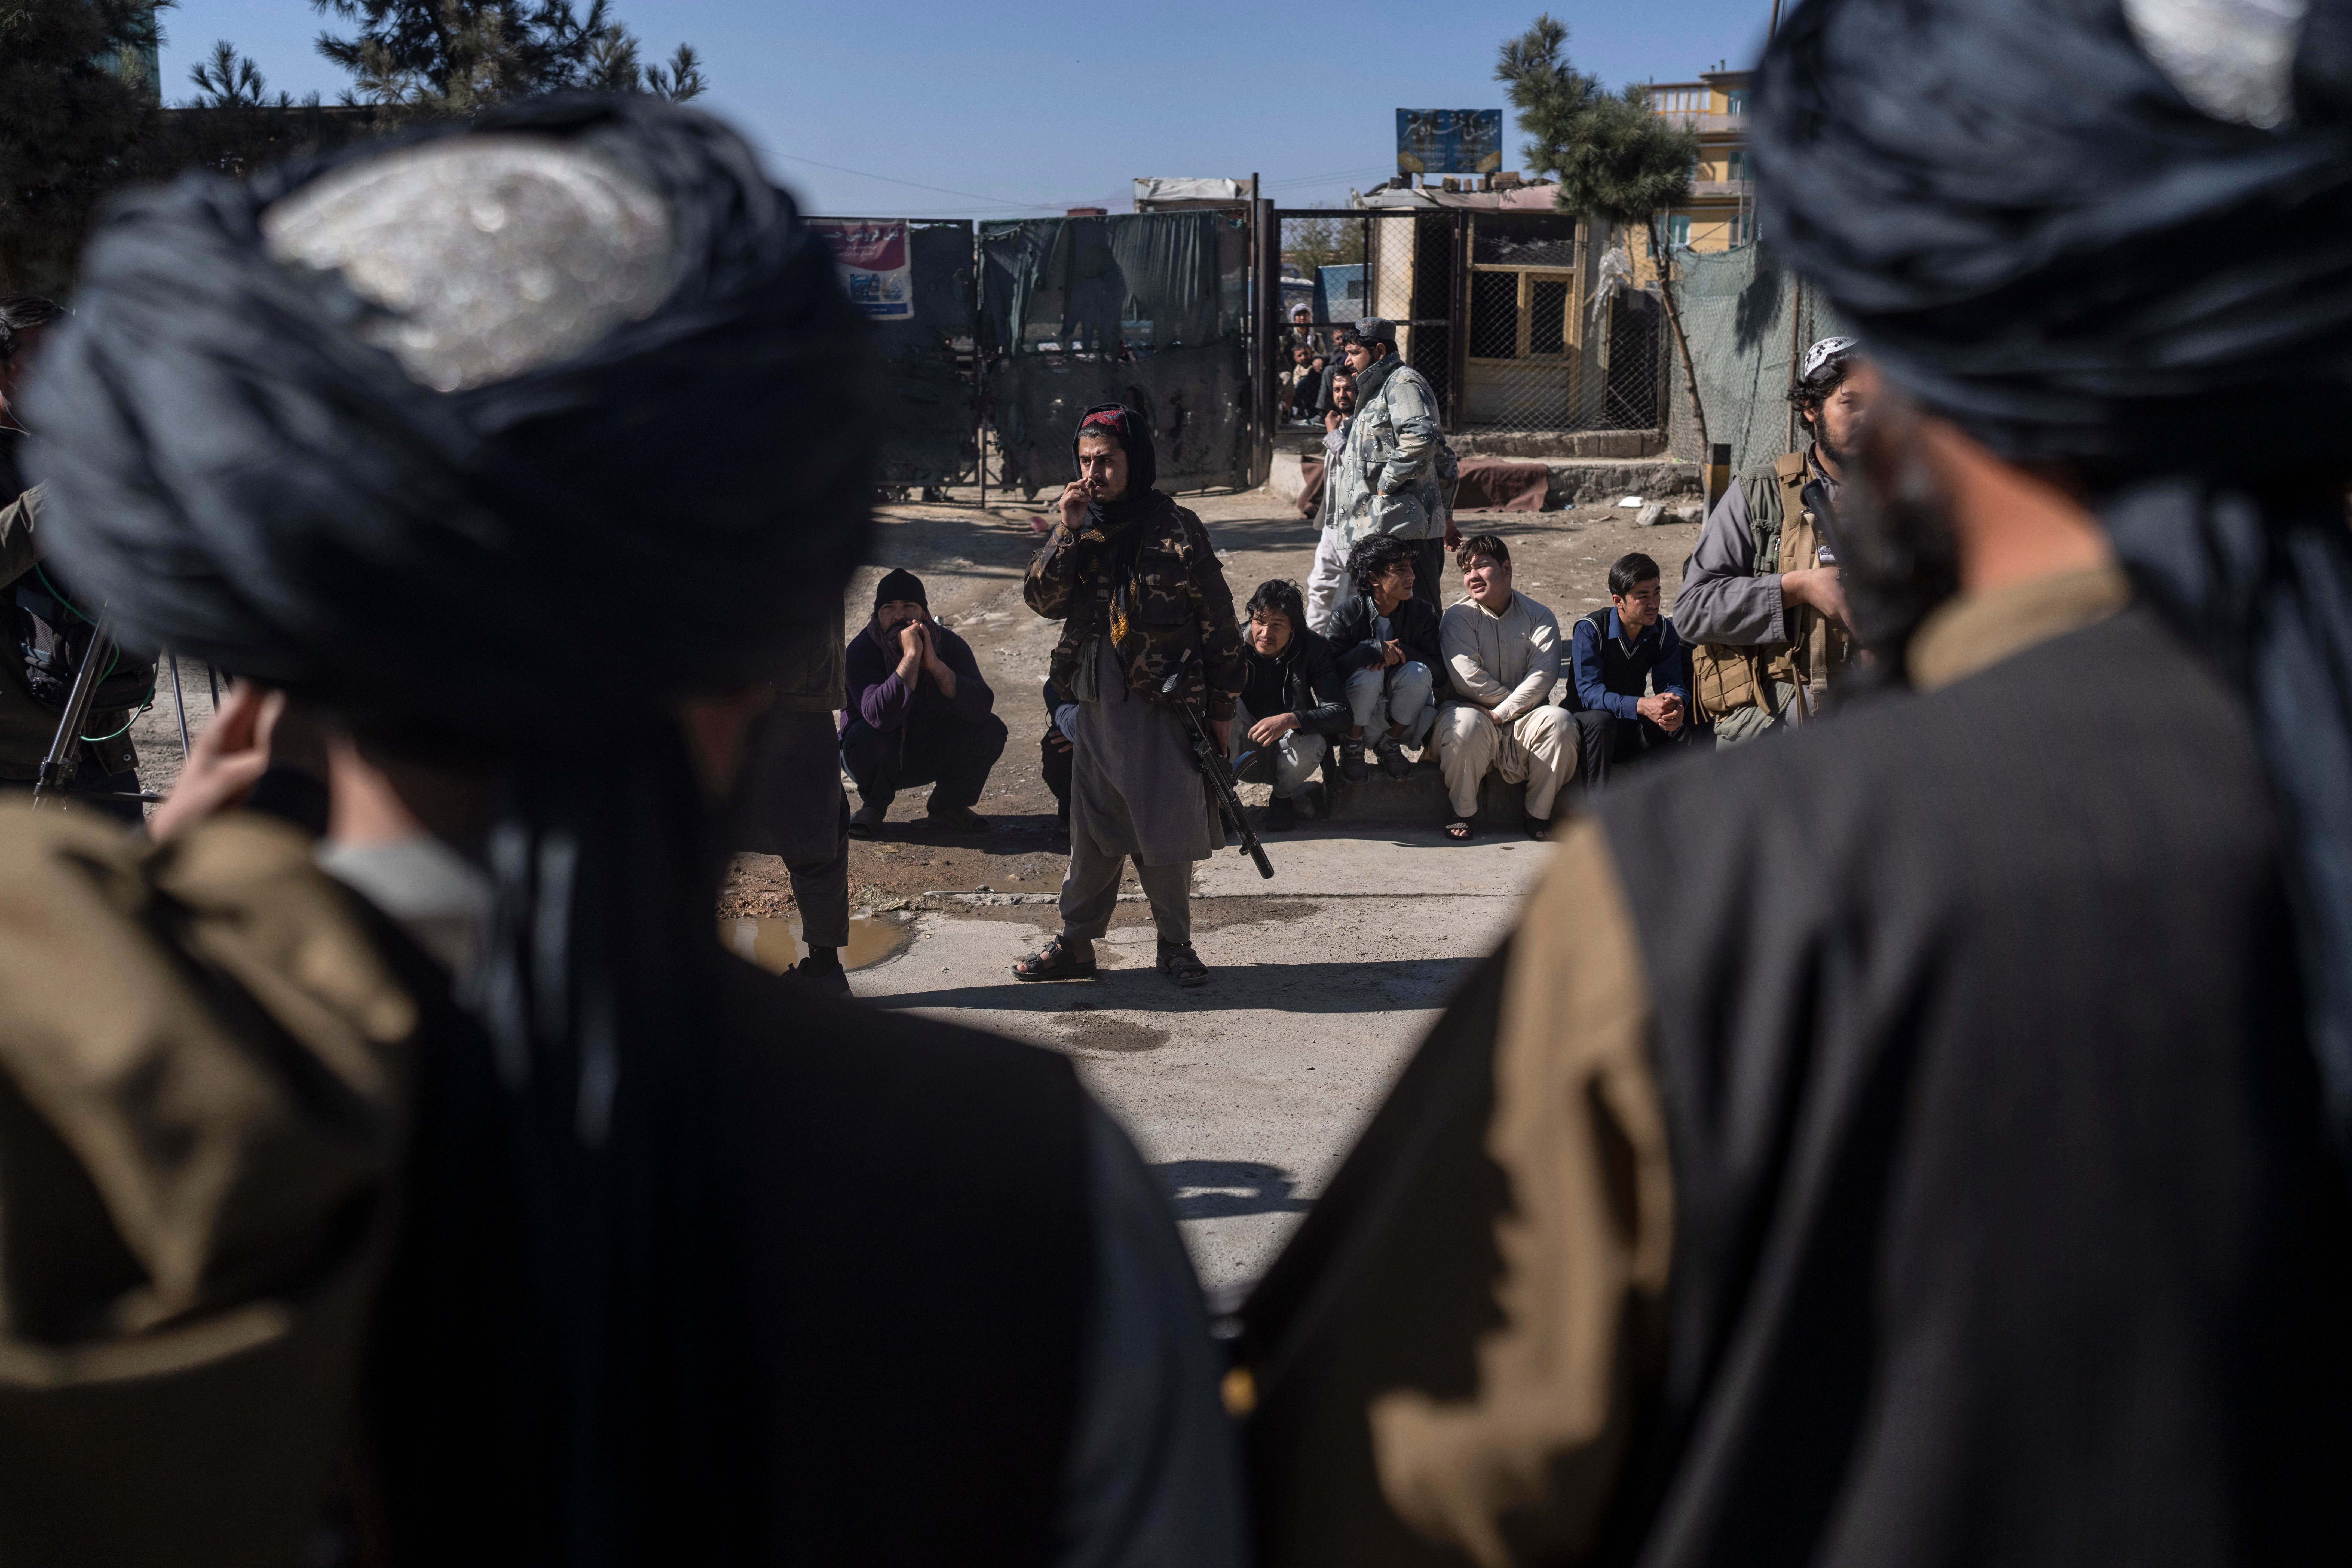 Taliban fighters secure the area after a roadside bomb went off in Kabul, earlier this month